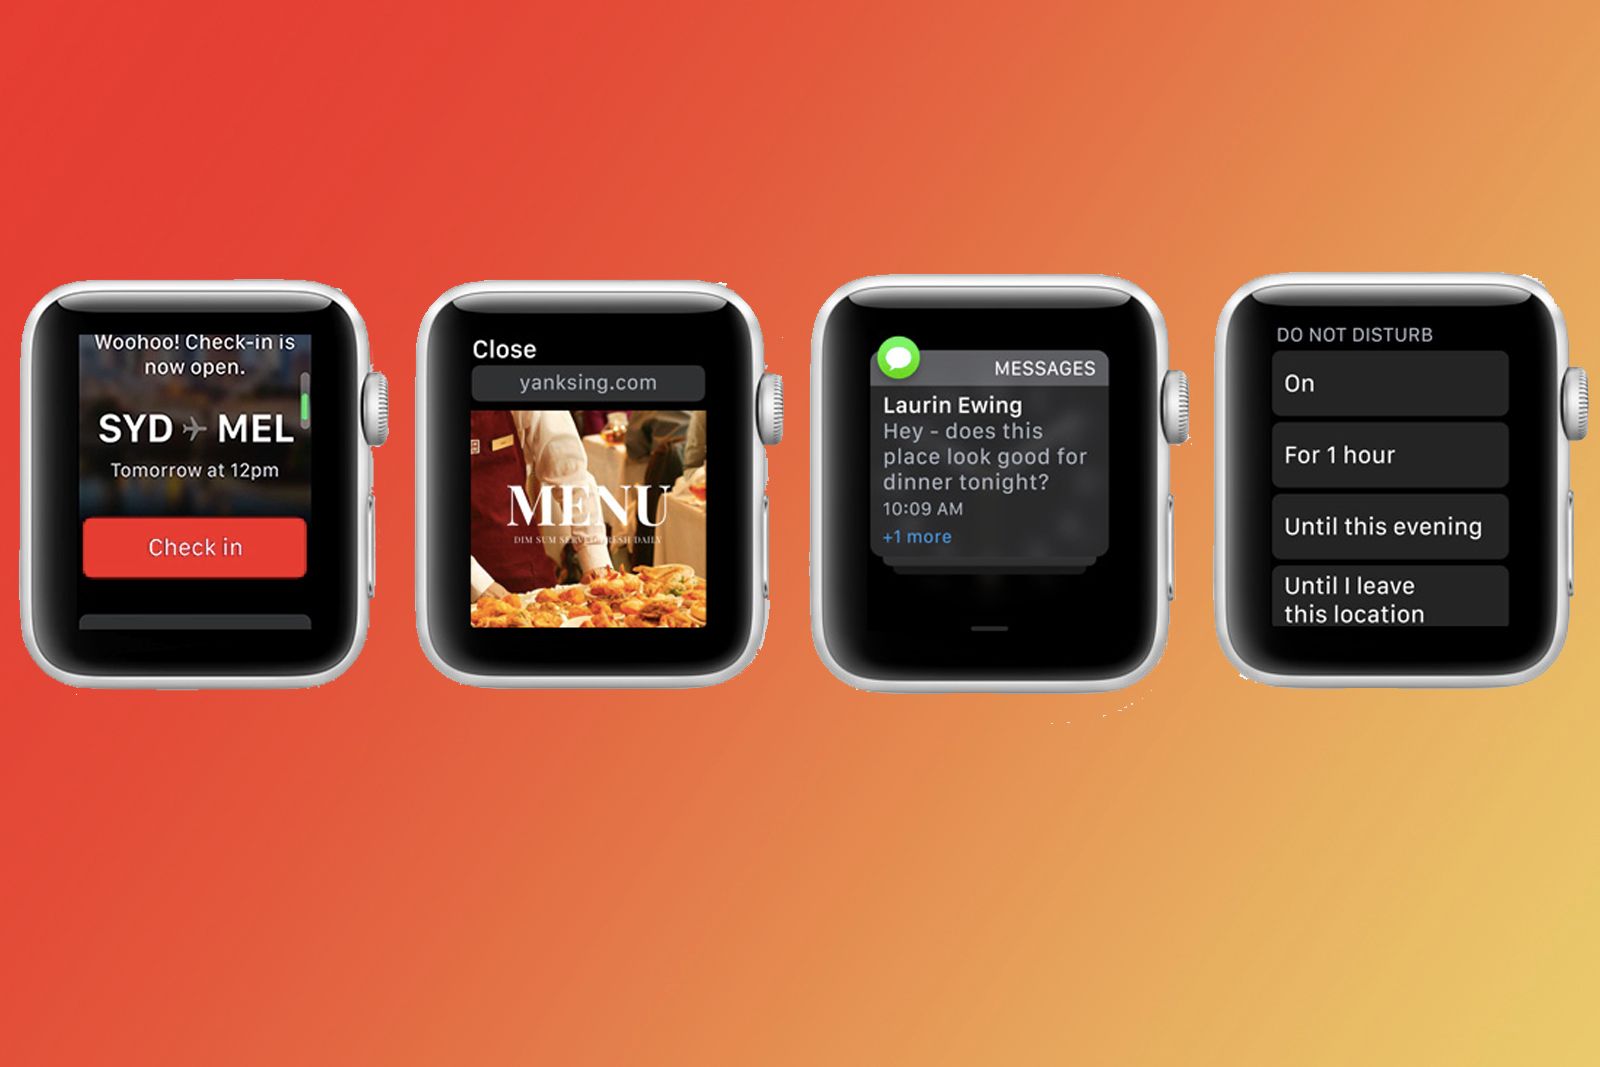 Whats New In Apple Watchos 5 image 2